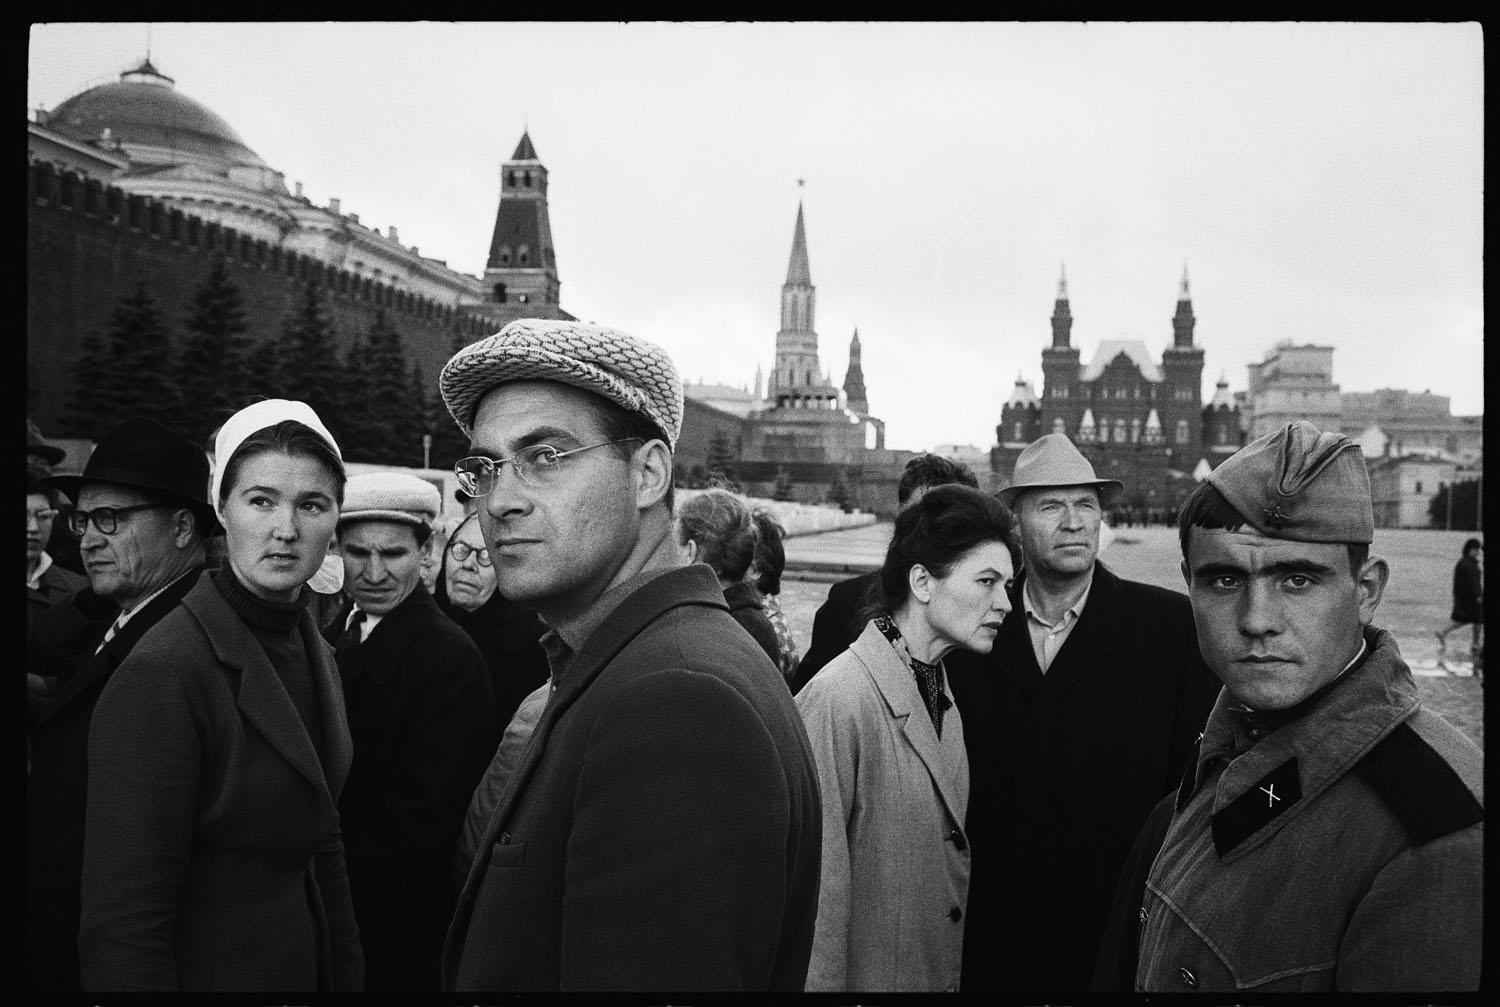 The Red Square by Thomas Hoepker. Moscow, USSR (1965). Image: Magnum Photos 